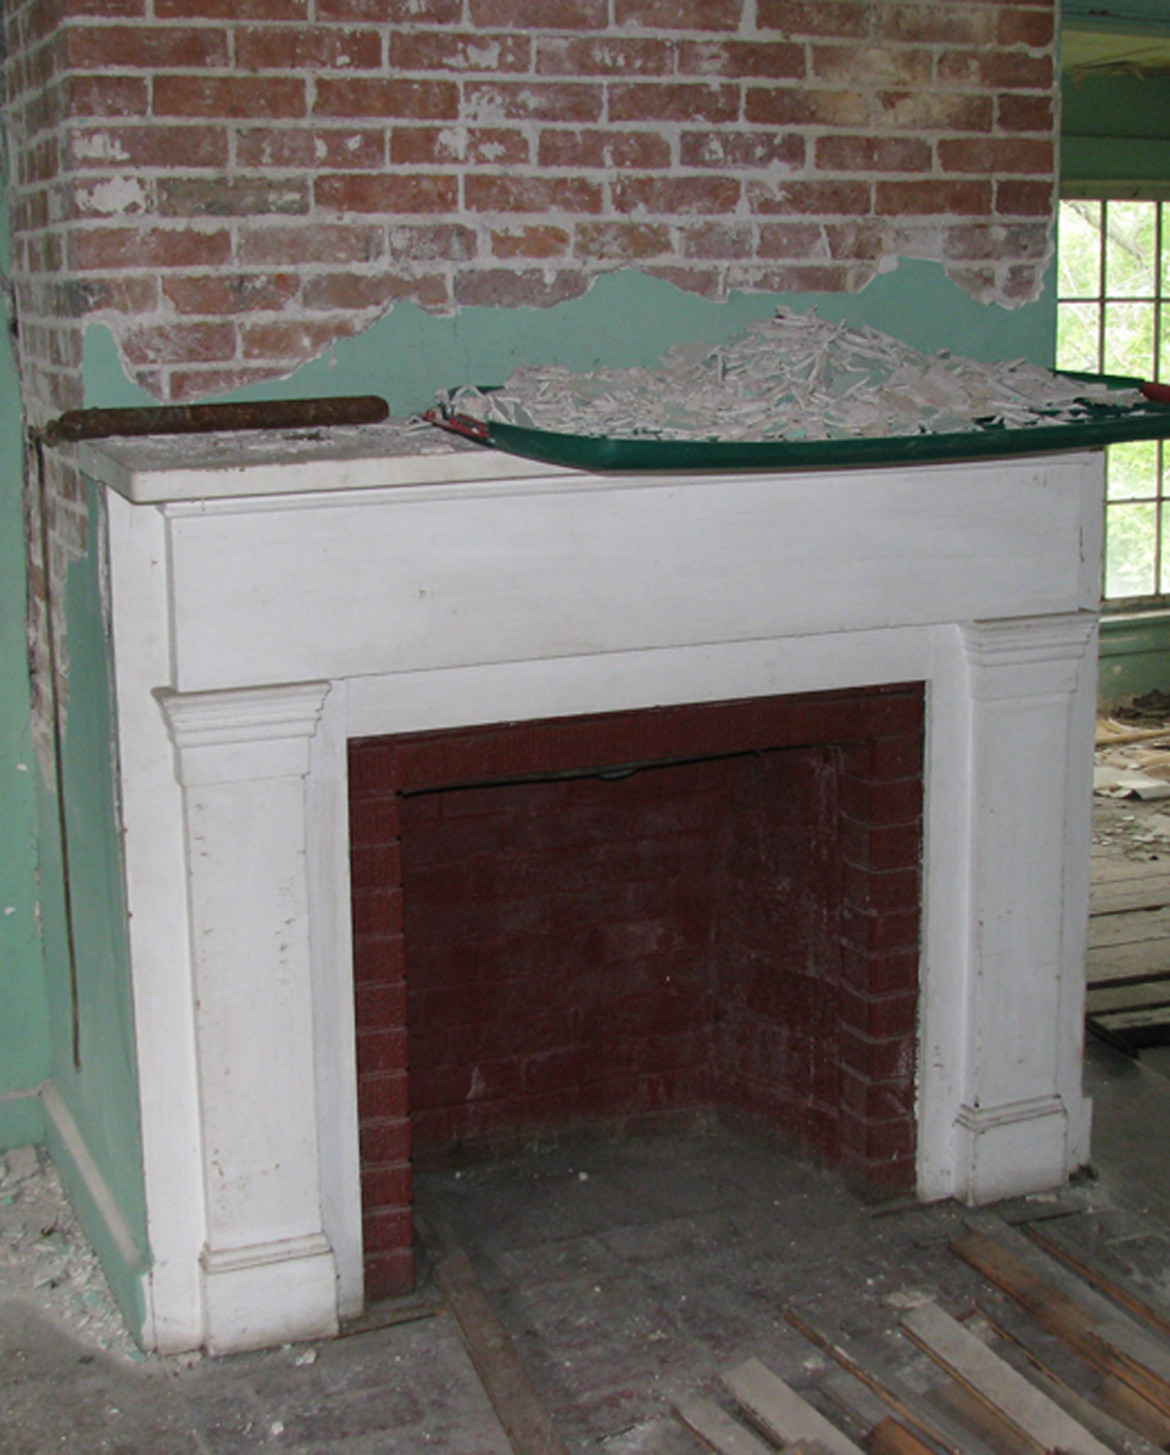 Most likely an original mantel on the second floor in the western room.